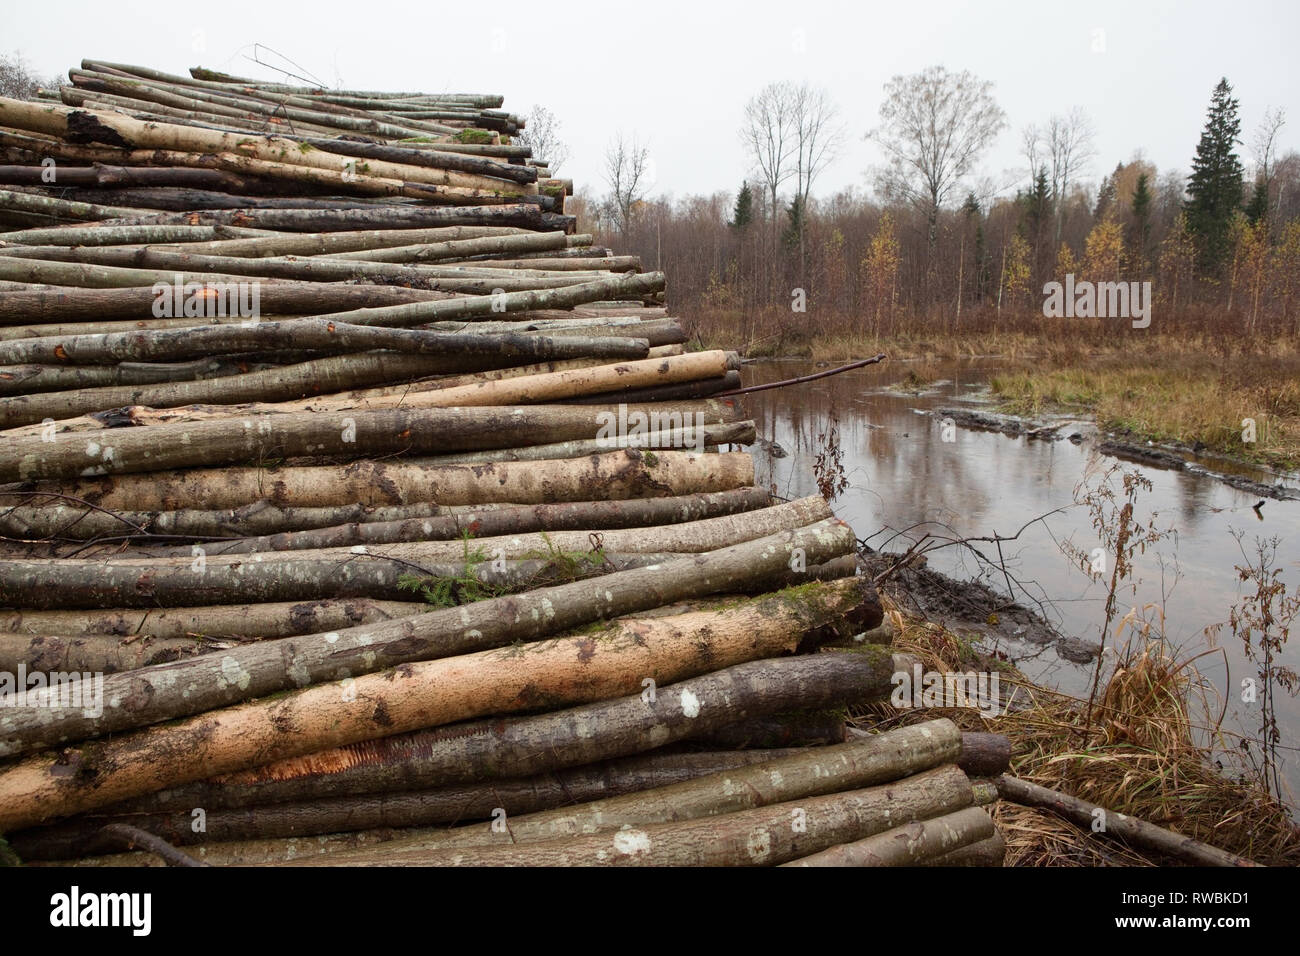 Stacked forest clearance tree trunks in rural forest, Latvia Stock Photo